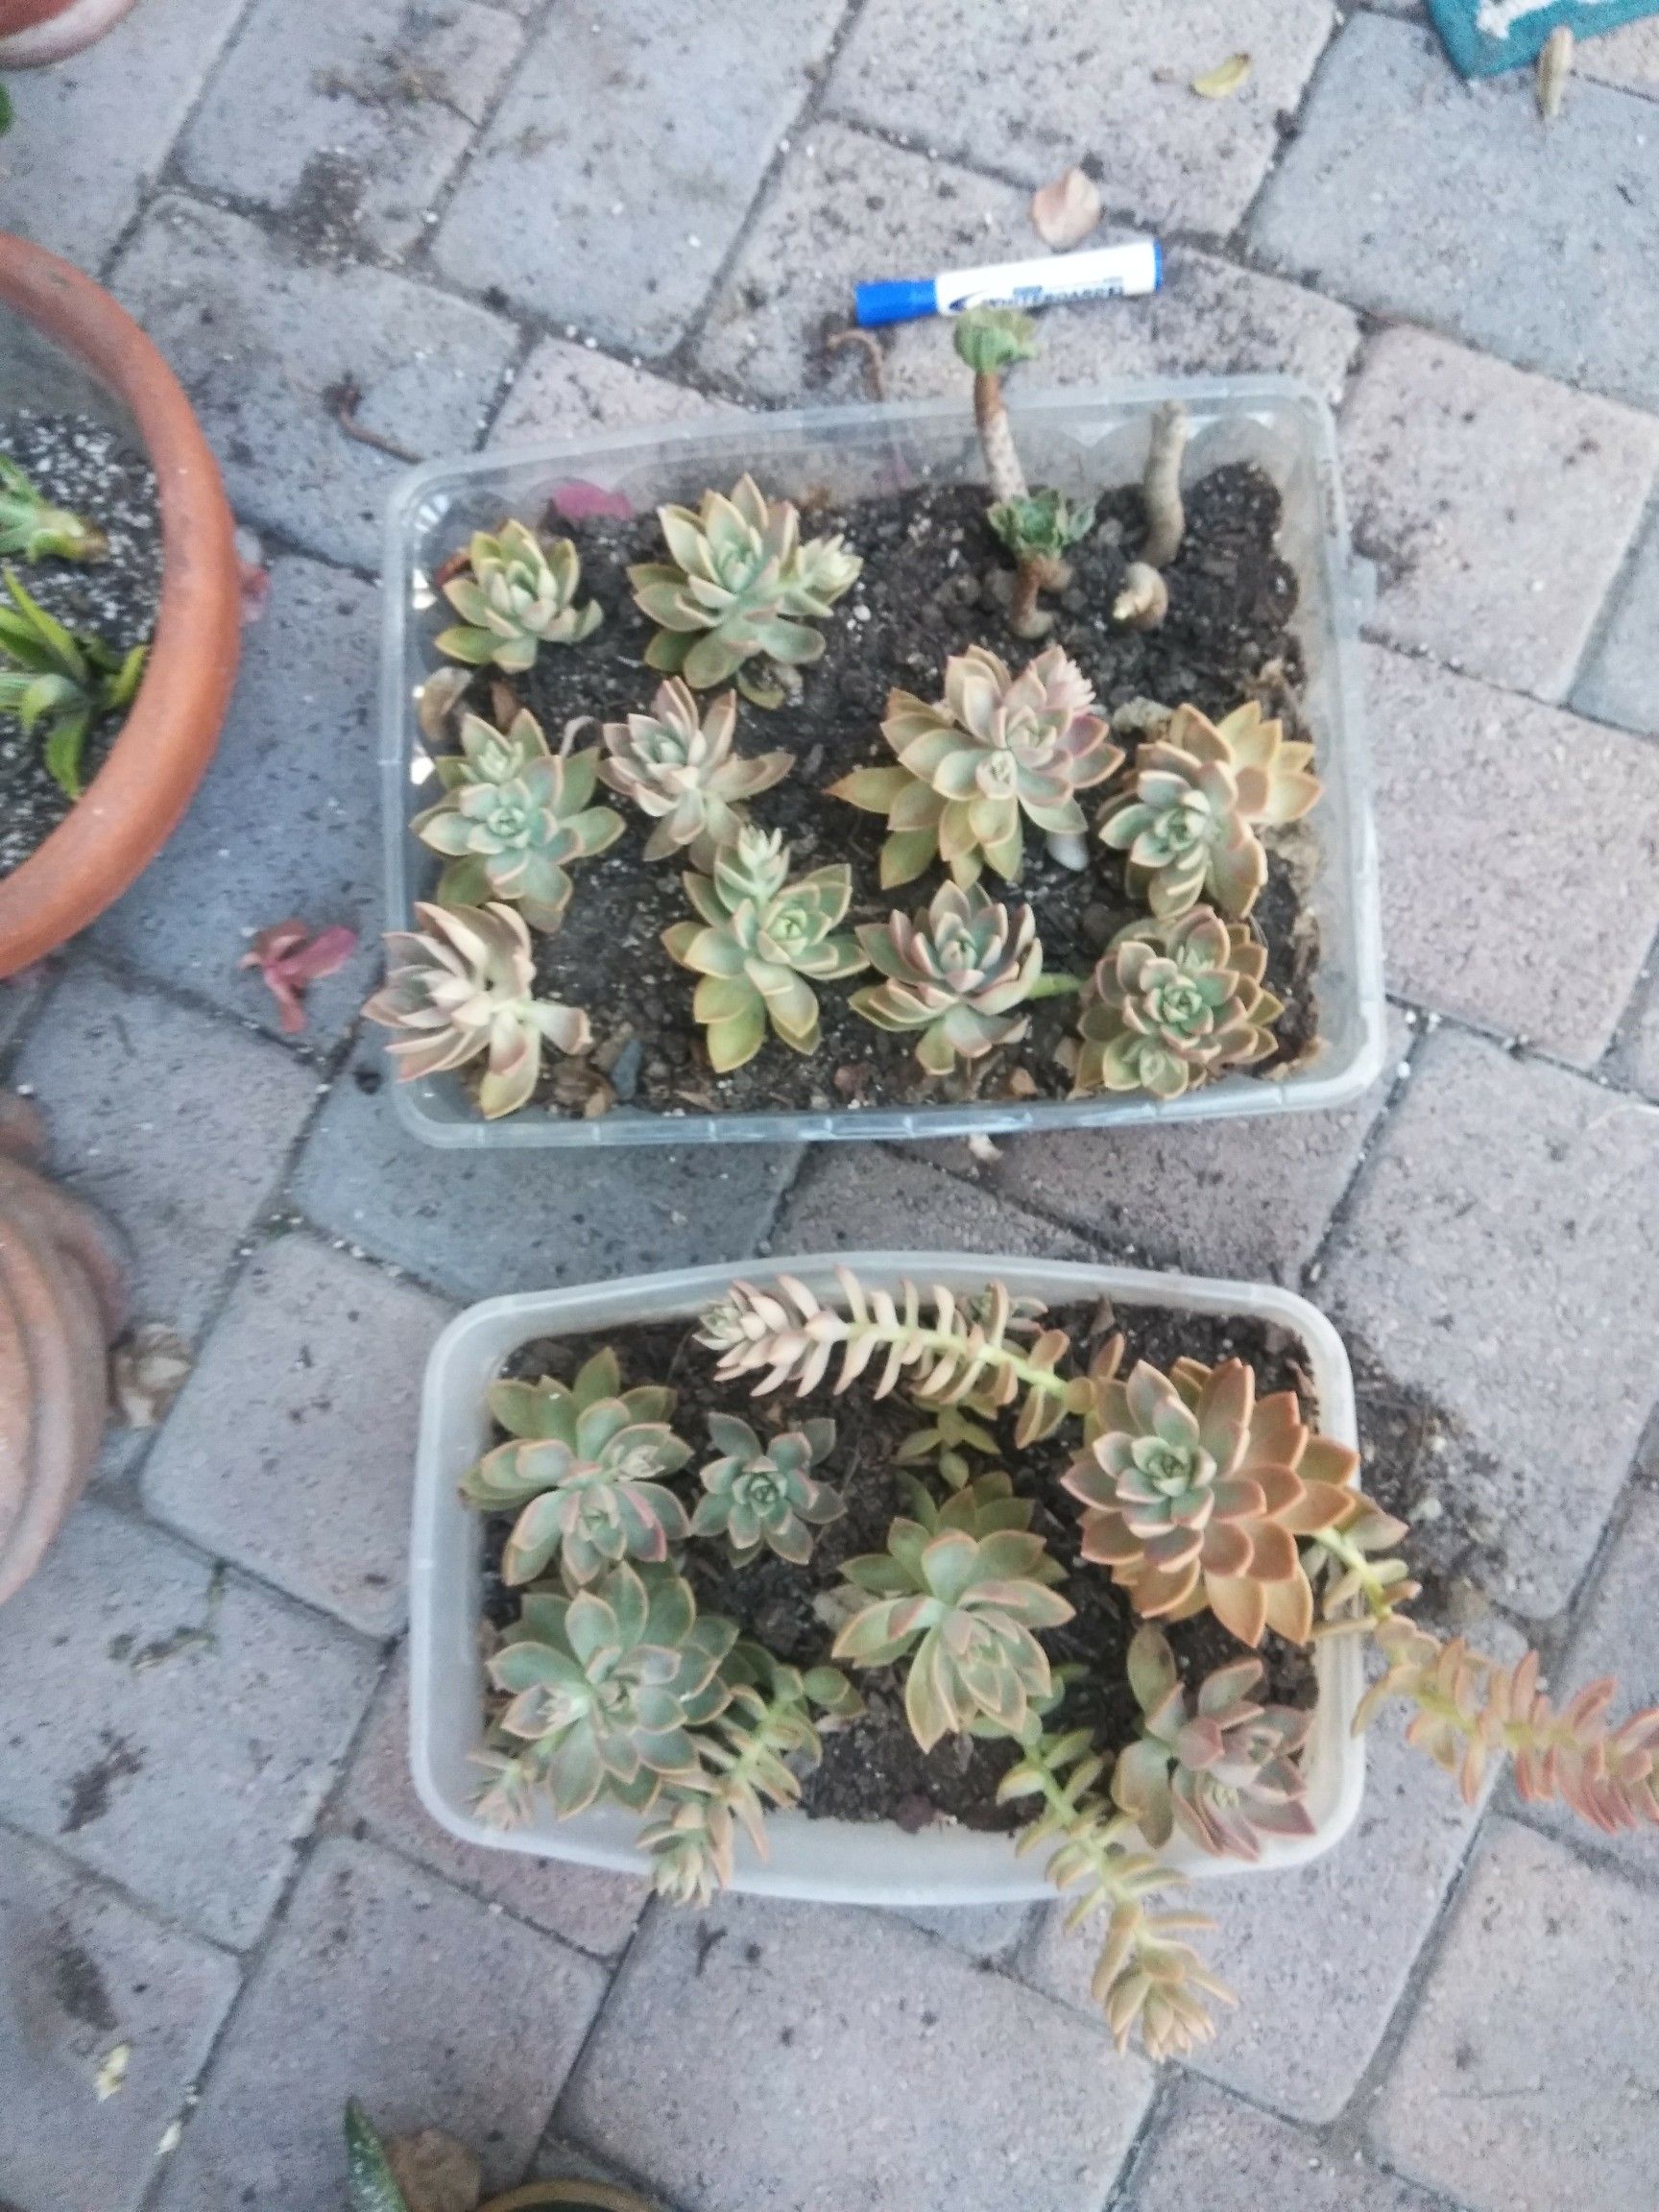 Ghost plant trays (all pictured)